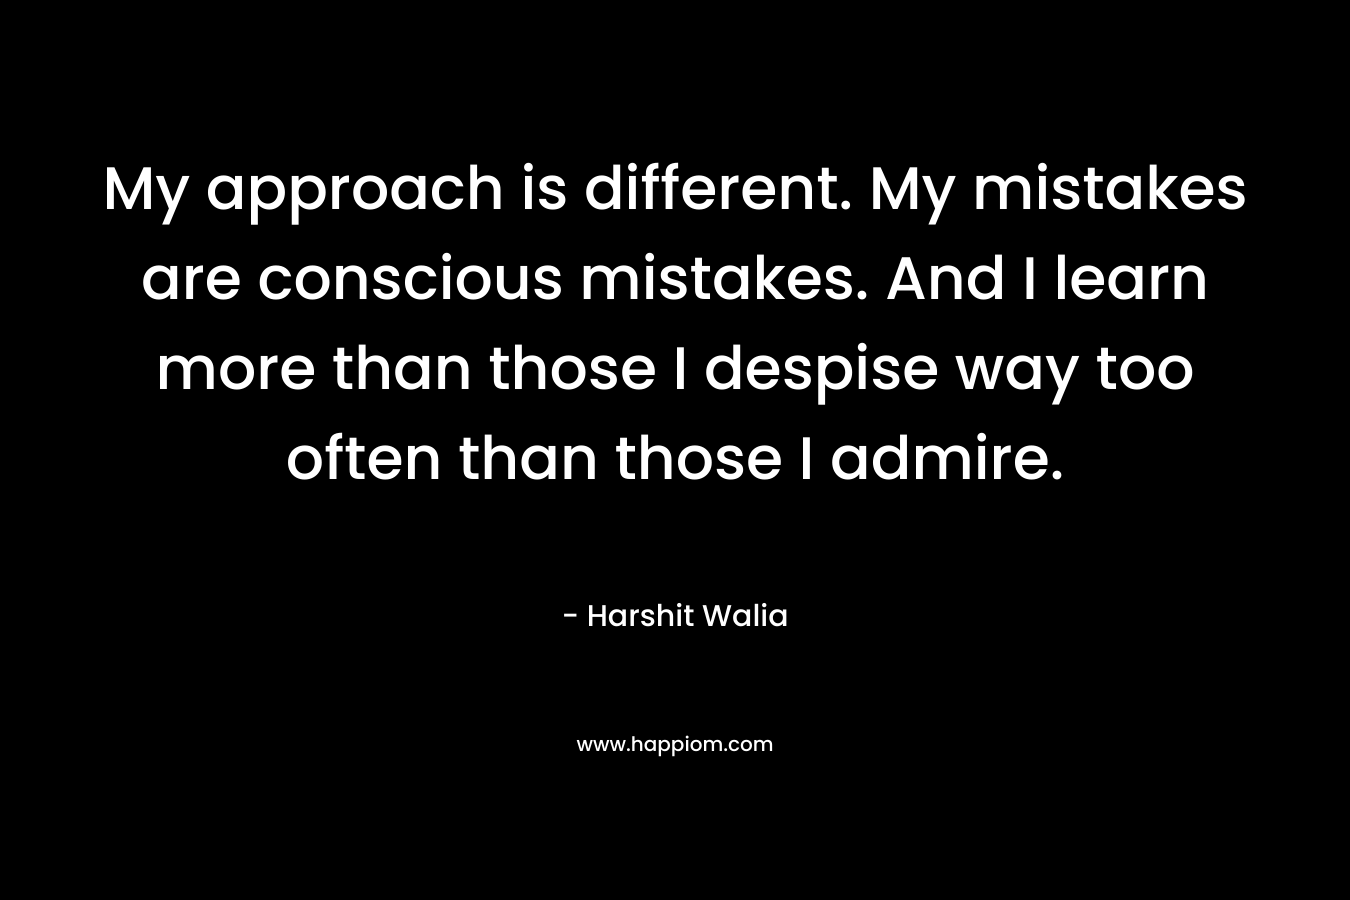 My approach is different. My mistakes are conscious mistakes. And I learn more than those I despise way too often than those I admire. – Harshit Walia